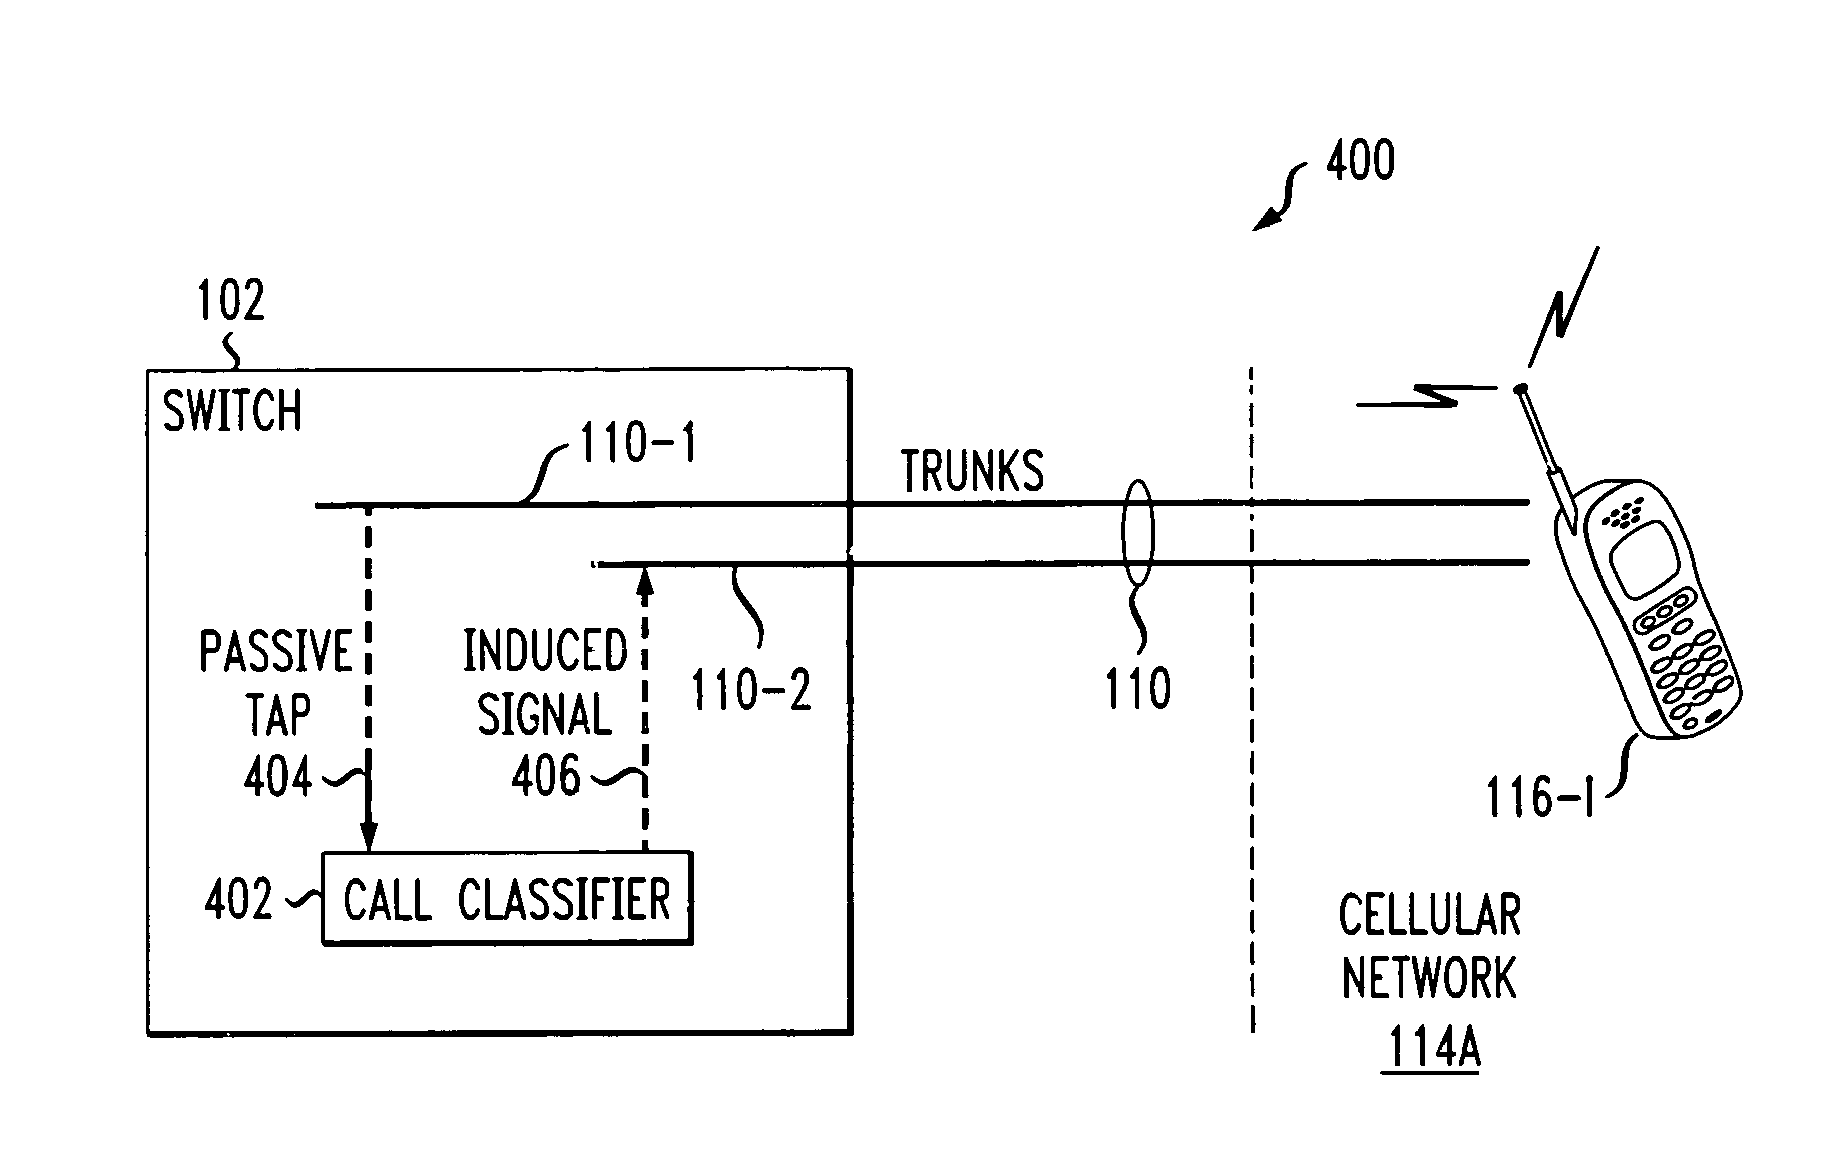 Switch-based call processing with detection of voice path connection between multiple trunks in external network